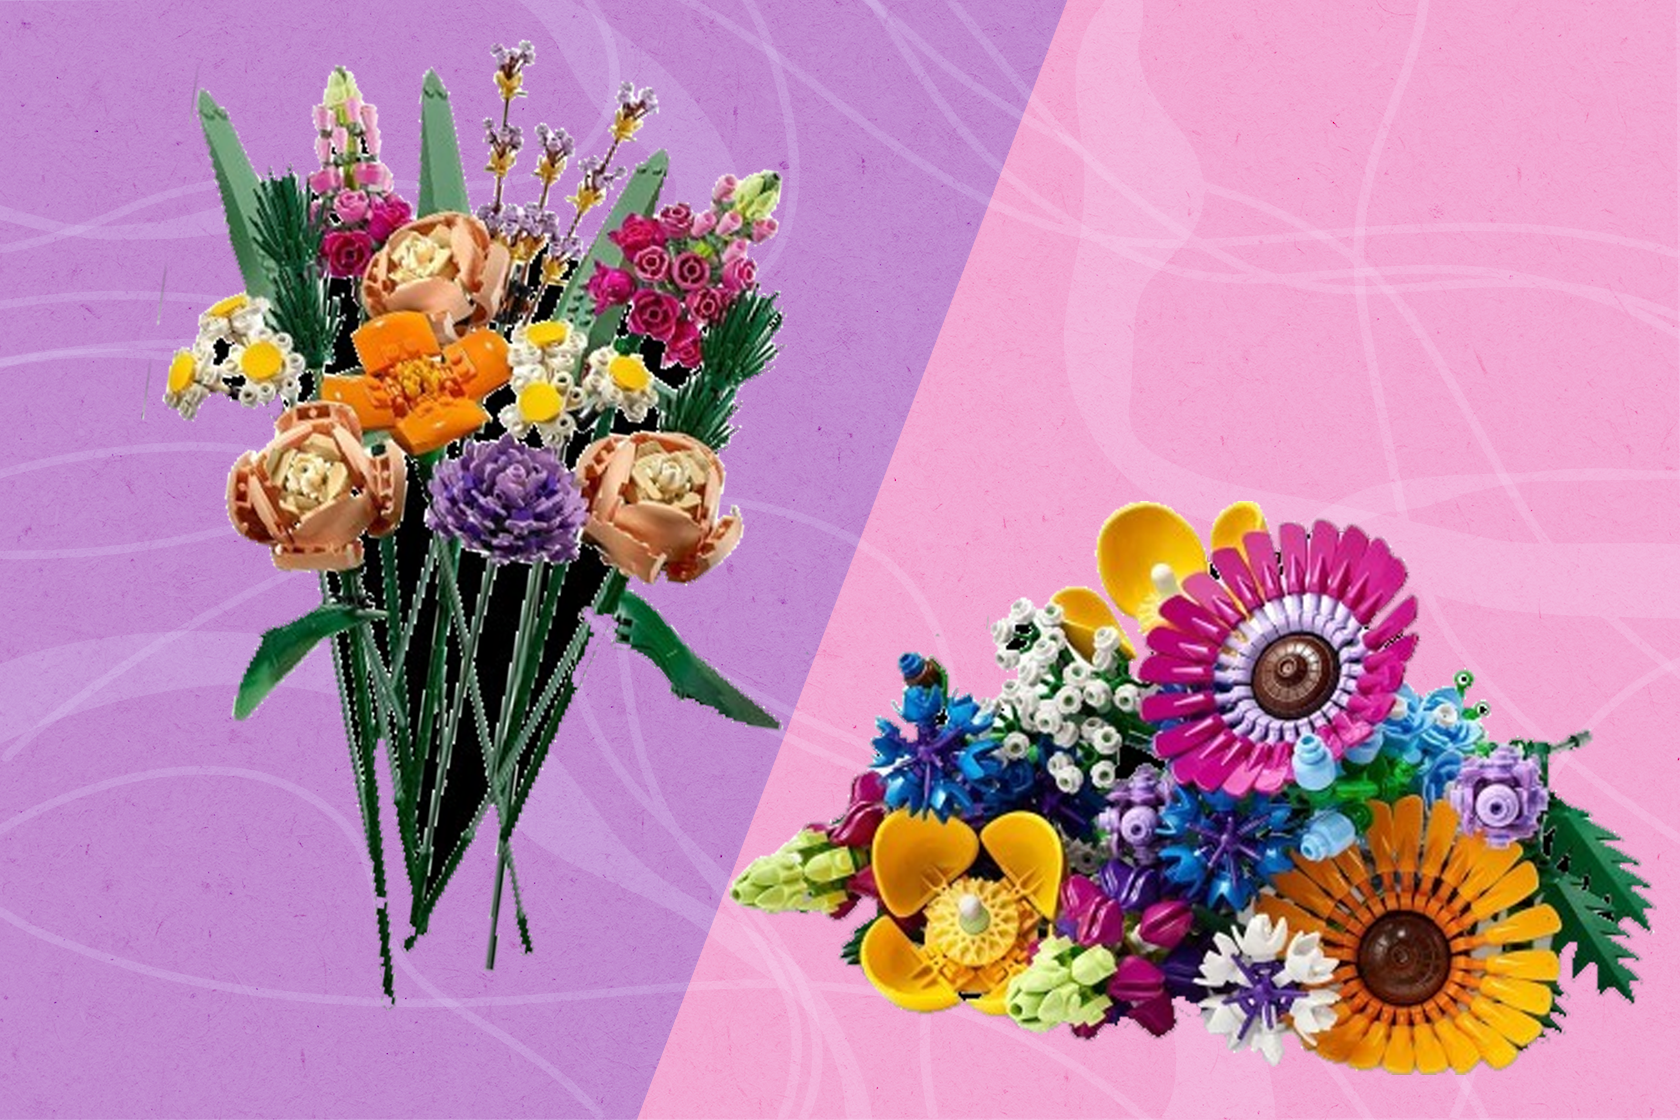 LEGO Icons - Wild Flower Bouquet: The Perfect Building Set for